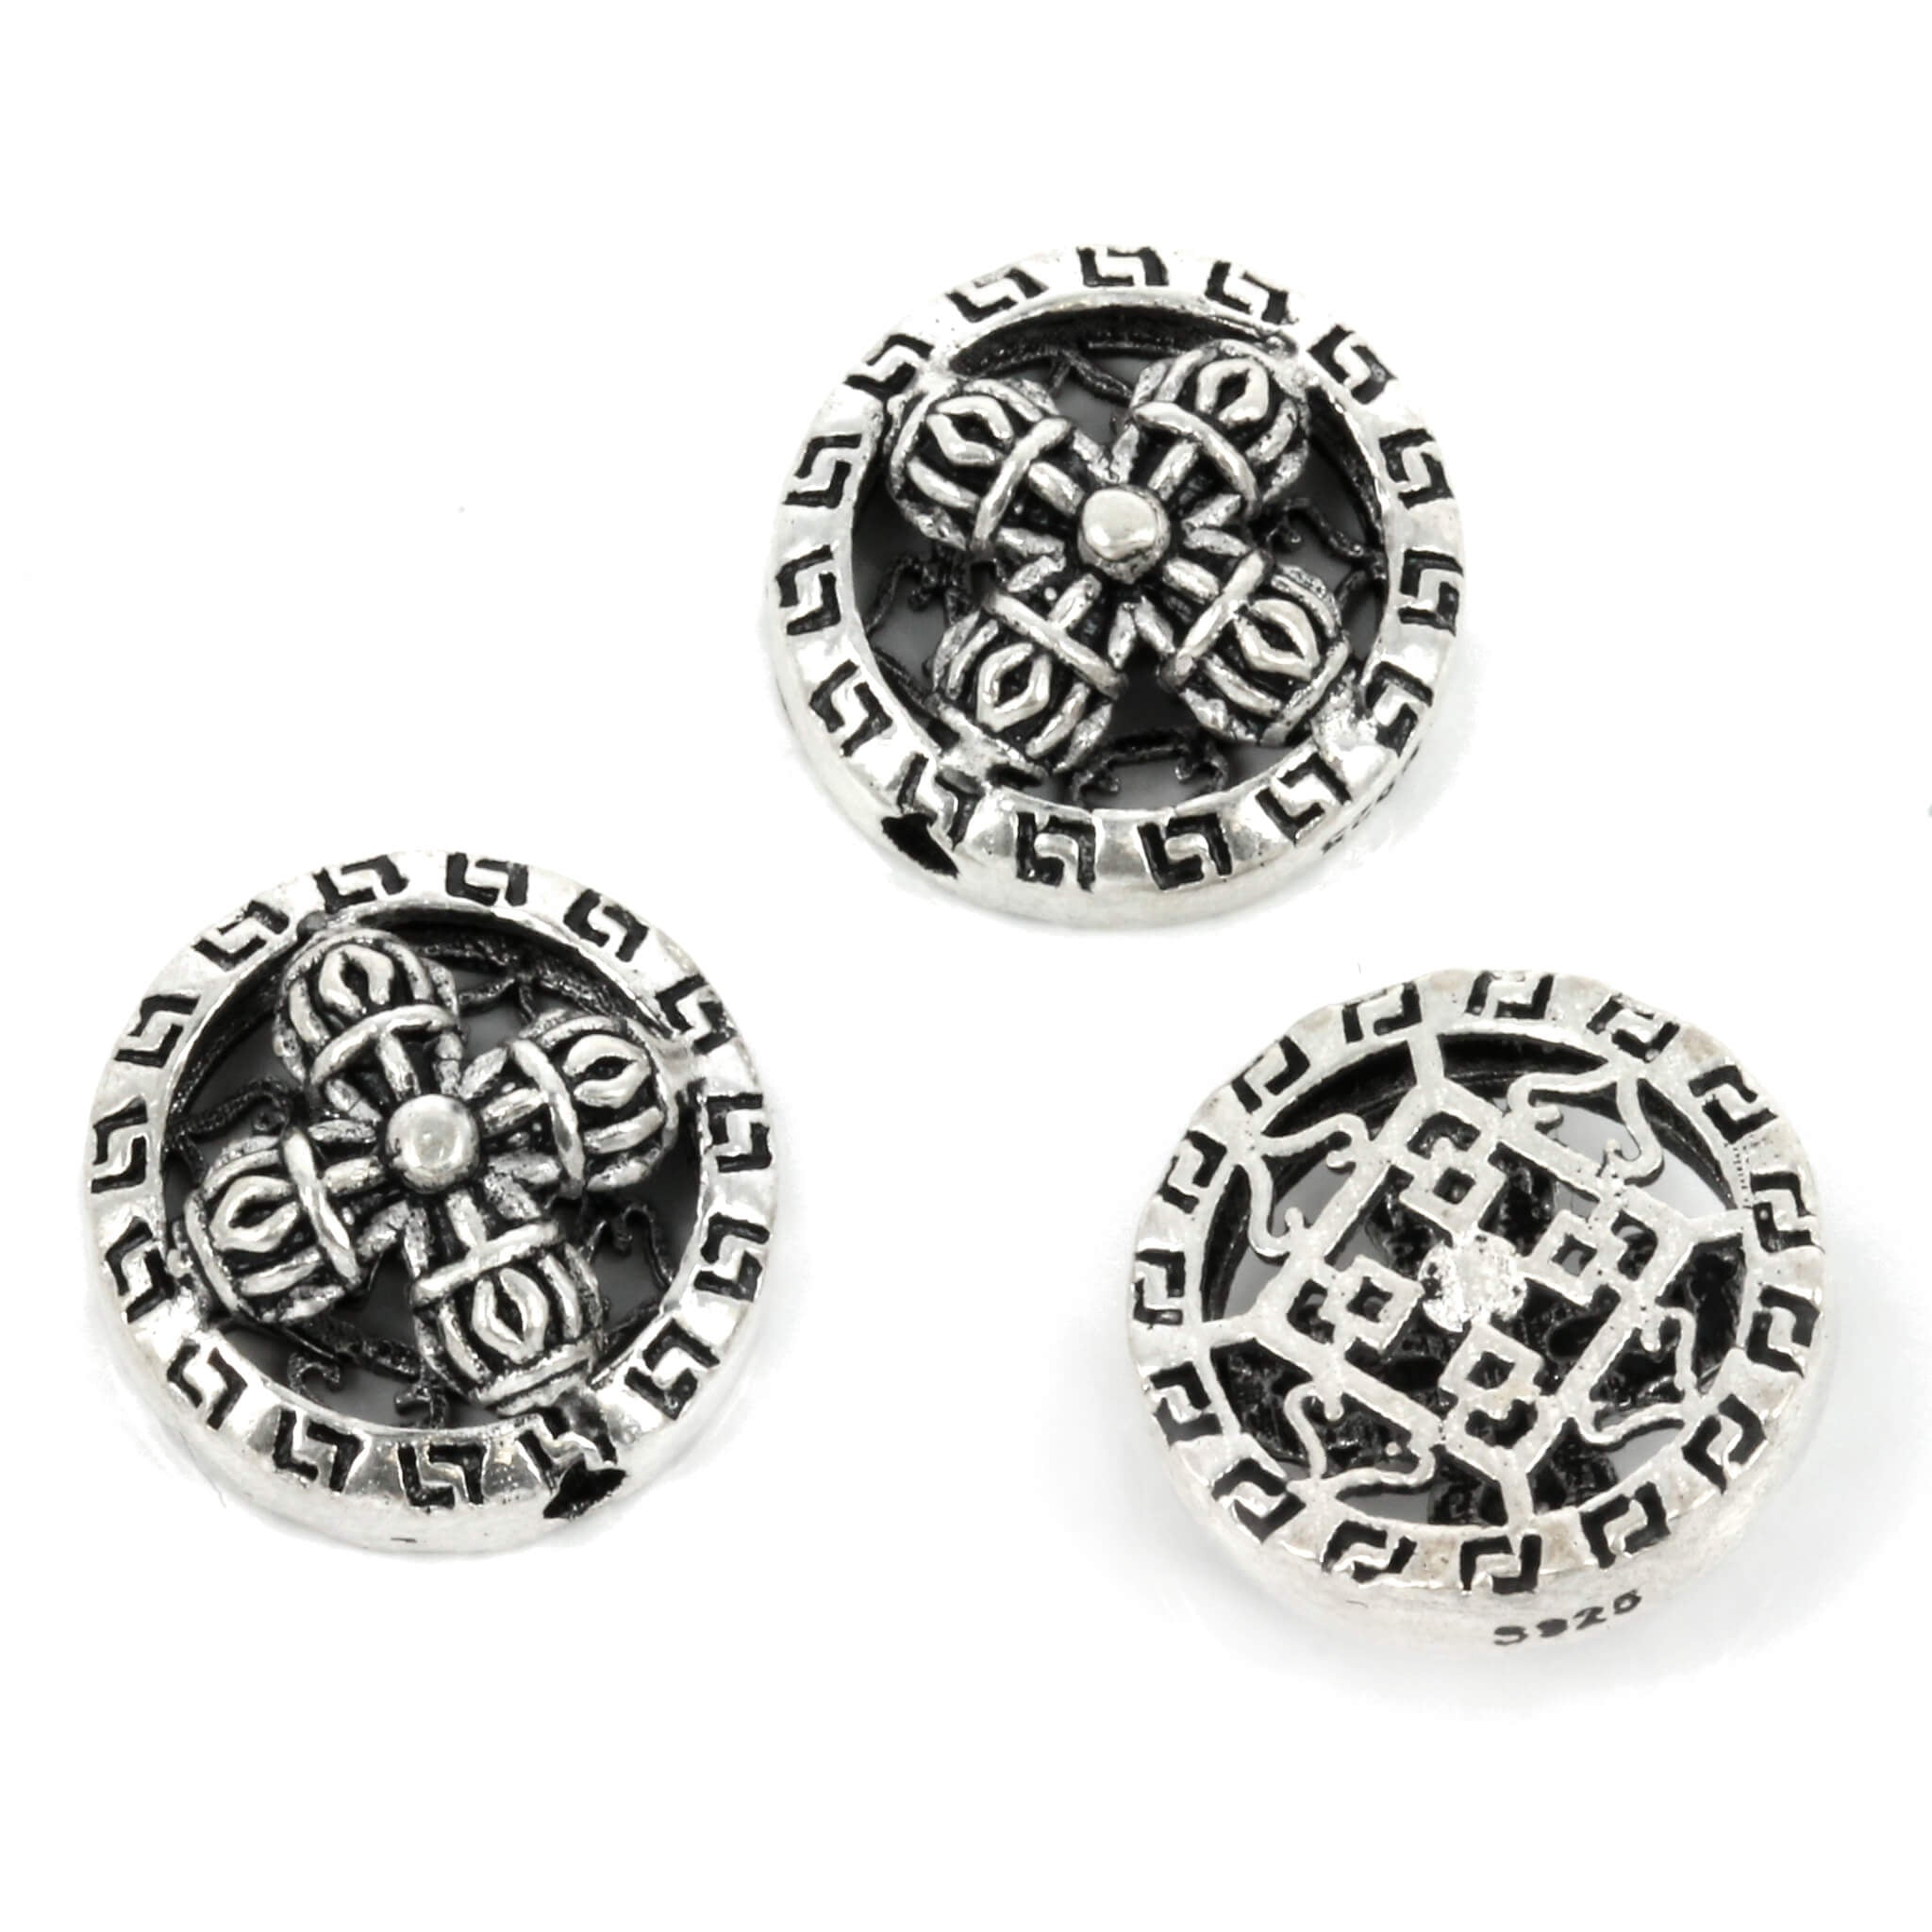 Hollow Disc Bead with Intricate Cross Pattern in Sterling Silver 14x5mm